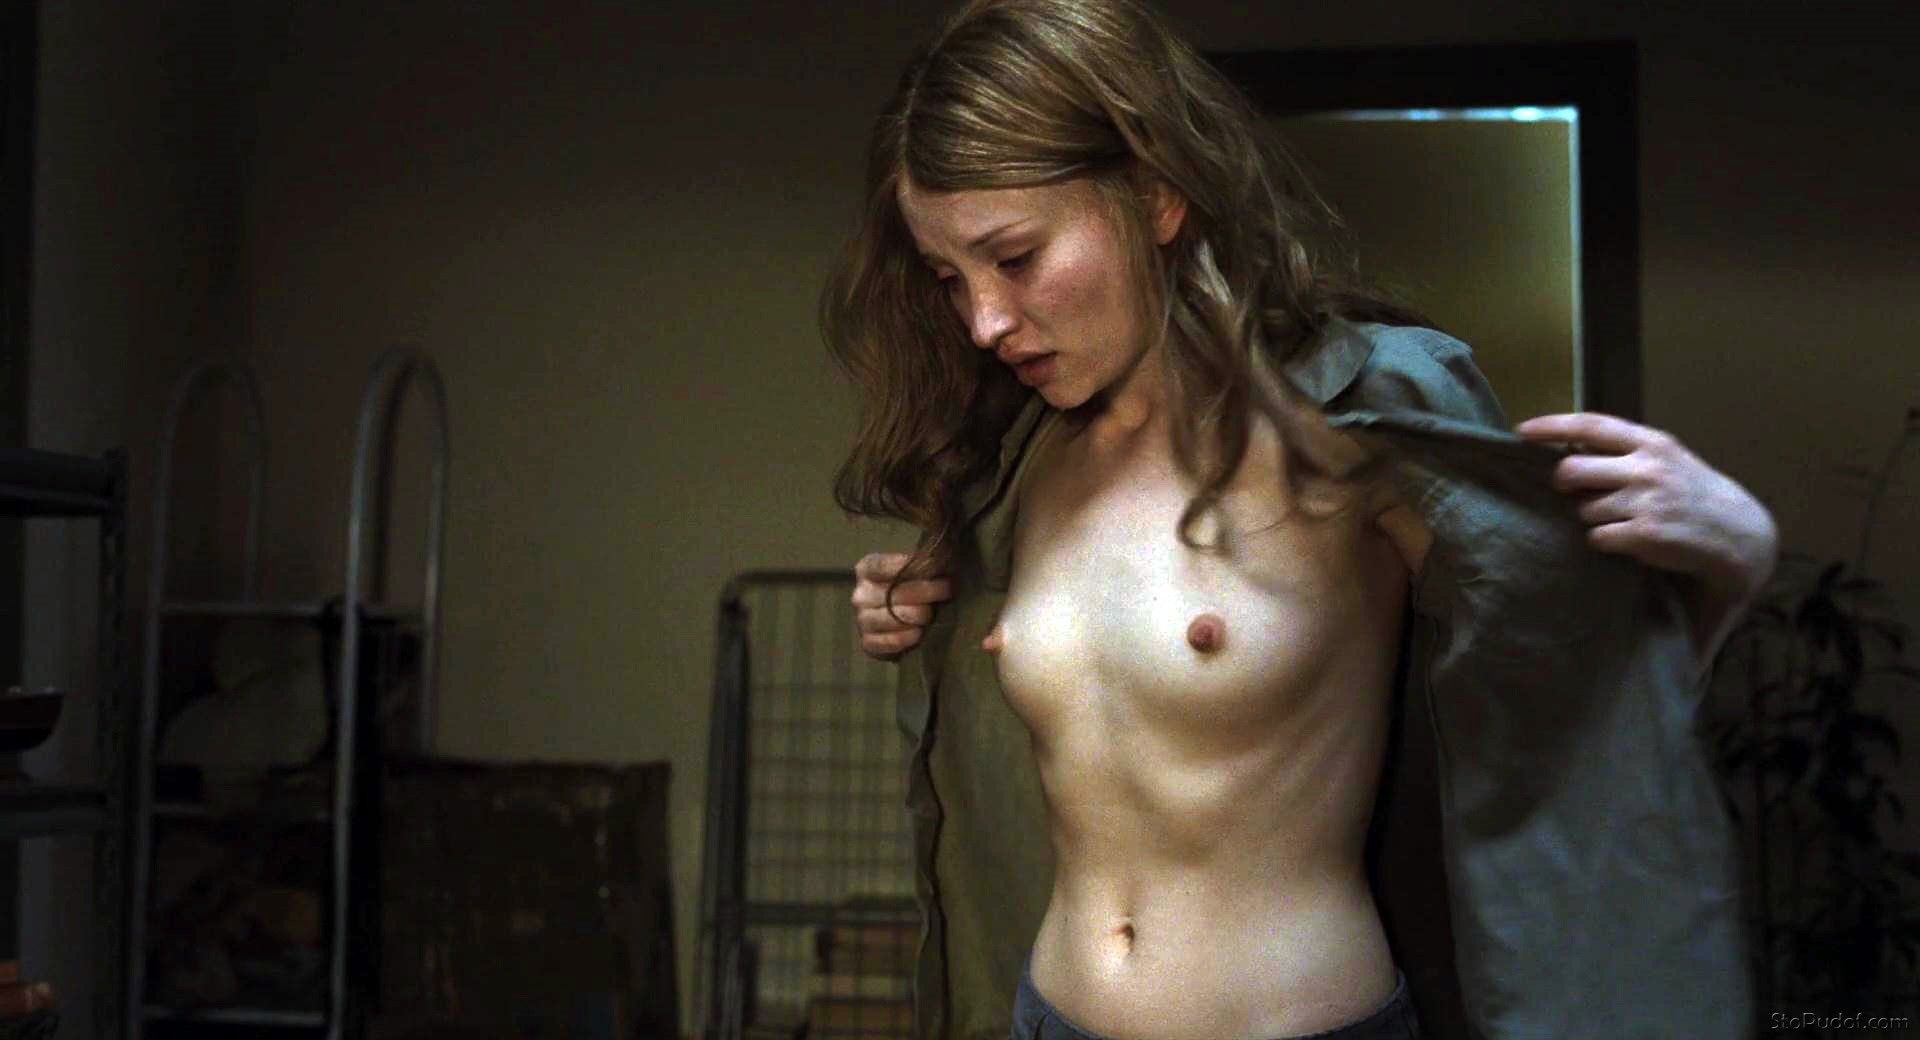 Emily browning absolutely nude lingerie scenes